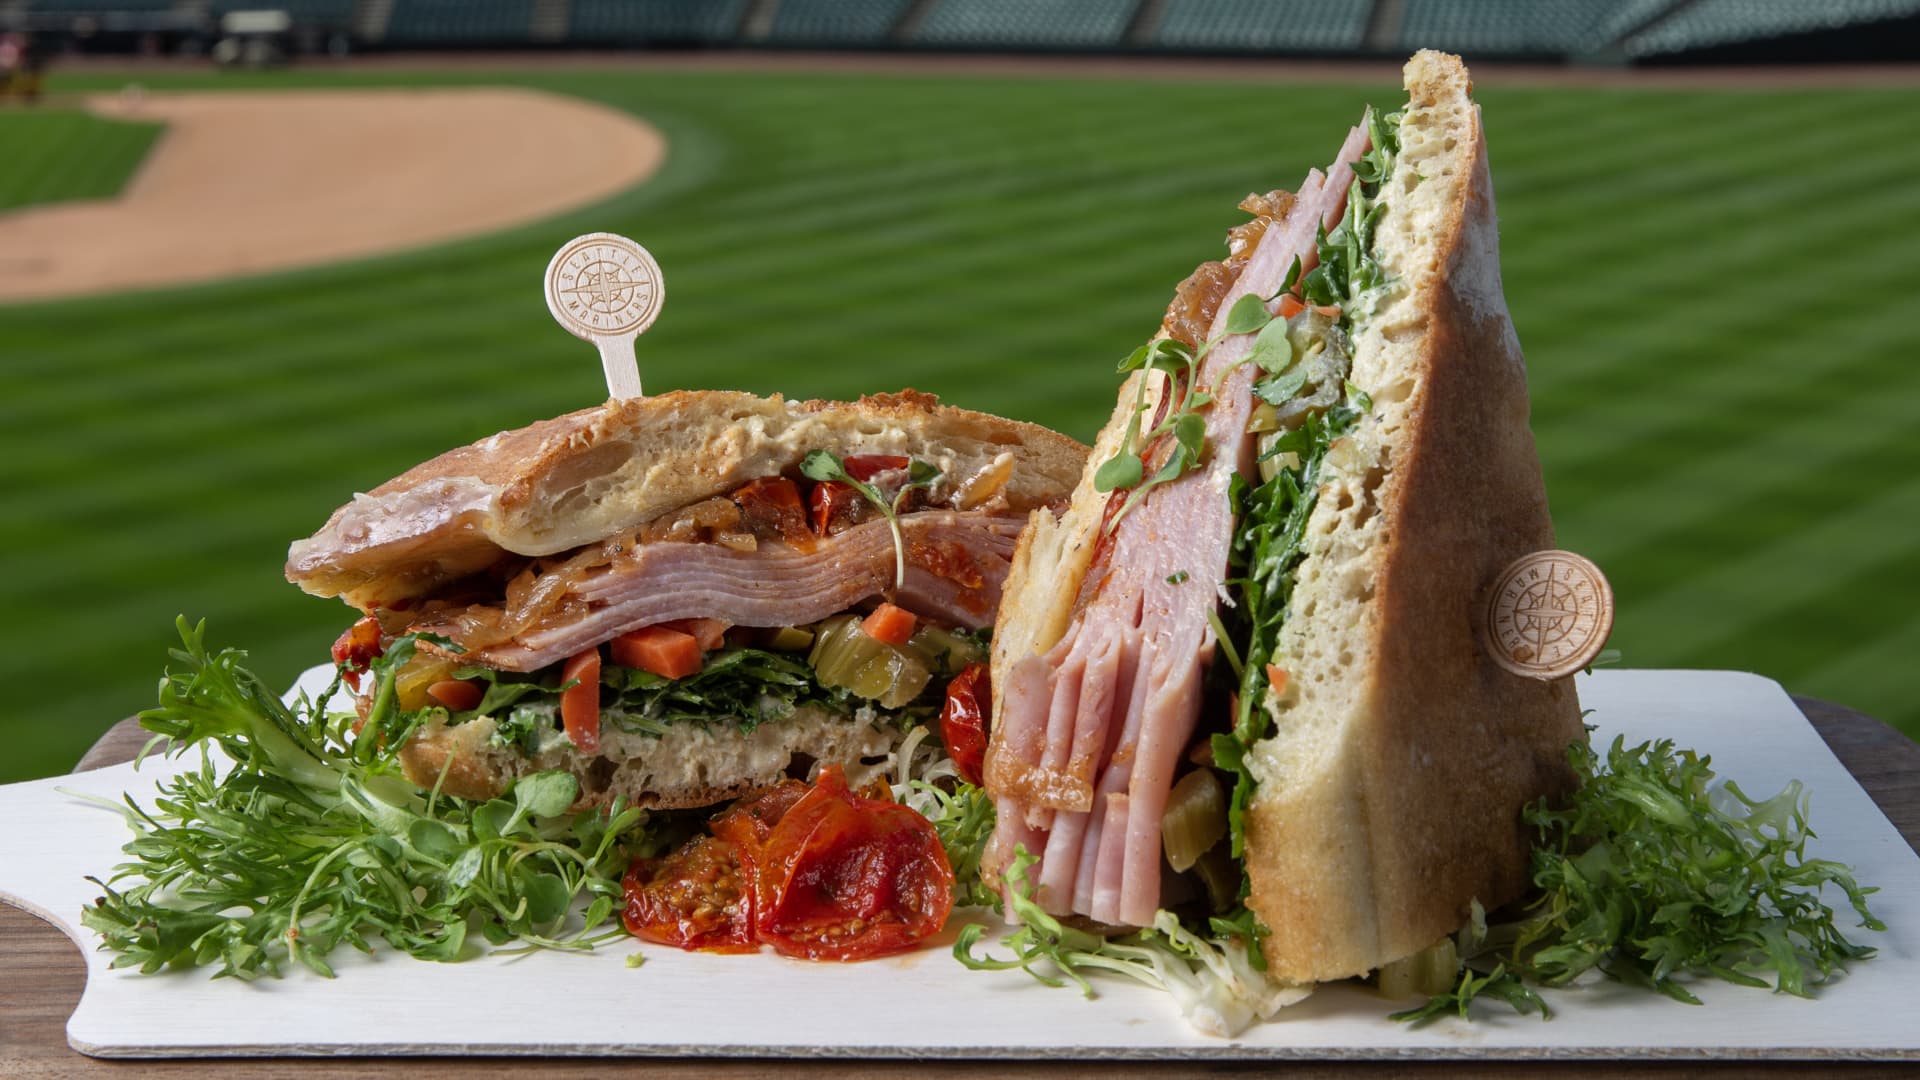 Food at your authorized ballpark is presumably going to be extra costly